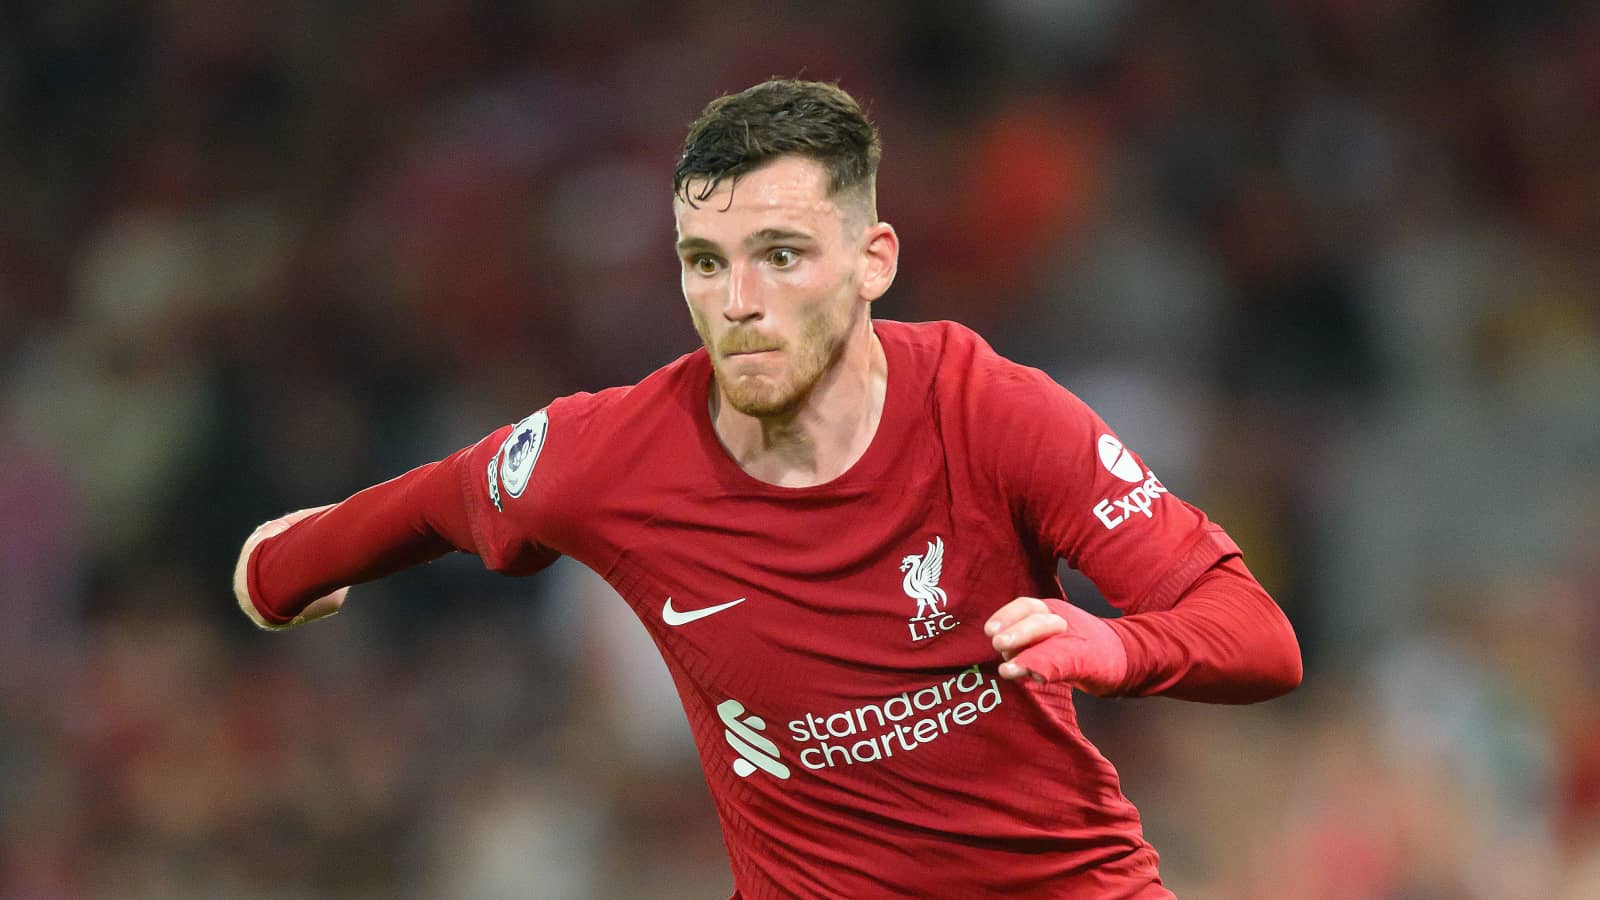 Robertson regularly considers leaving Liverpool for one club who can scratch the itch; outlines when move could happen